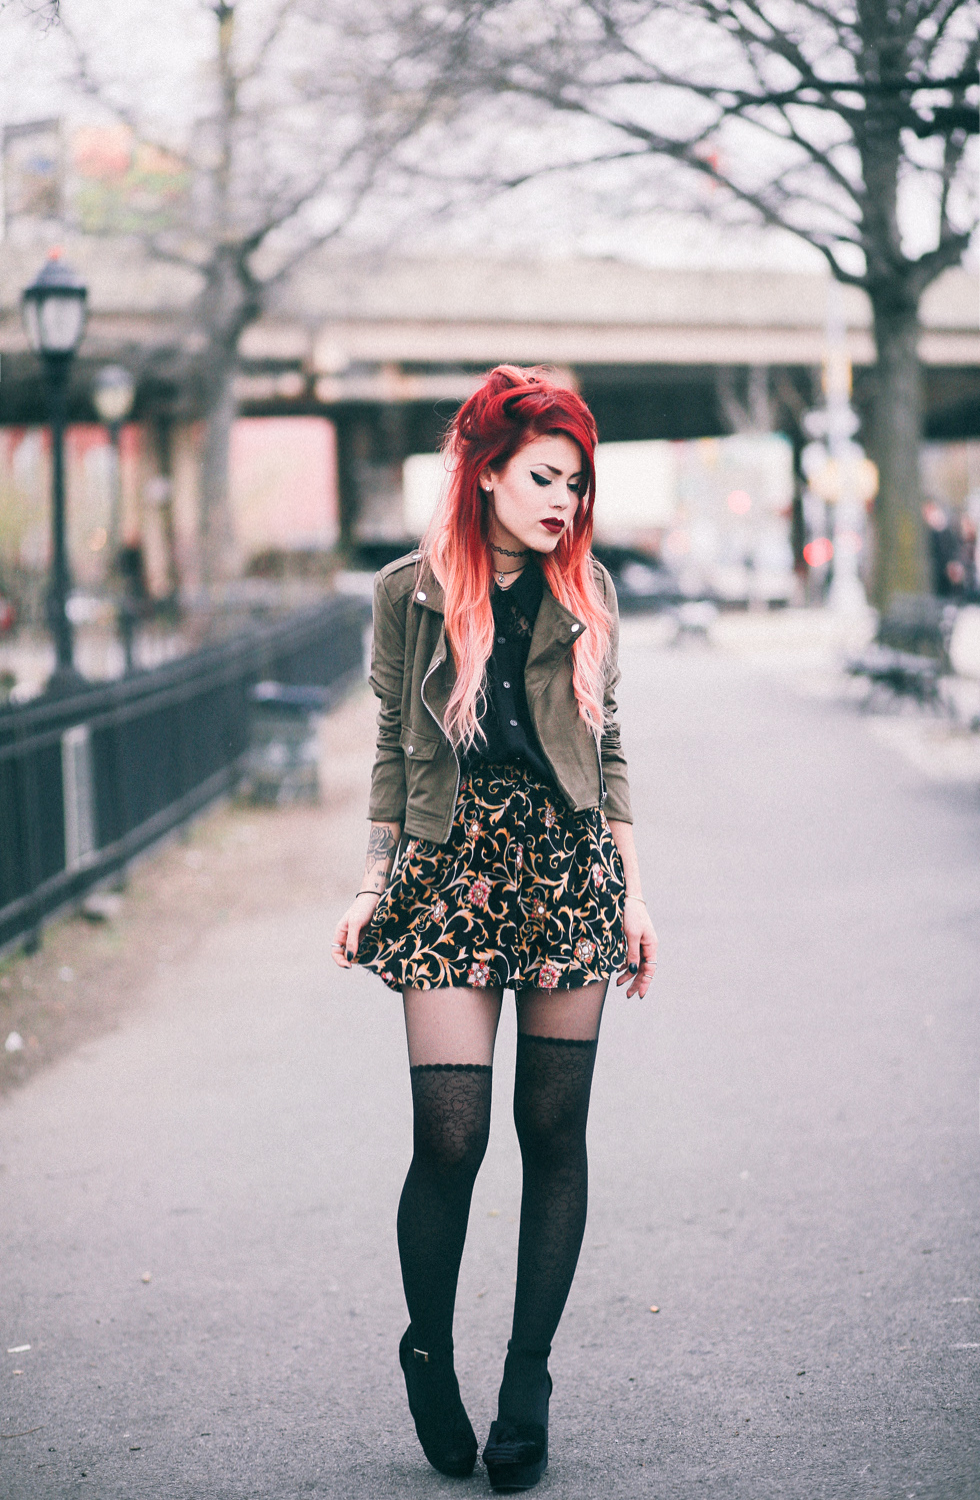 Lua wearing Missguided suede biker jacket and floral mini skirt